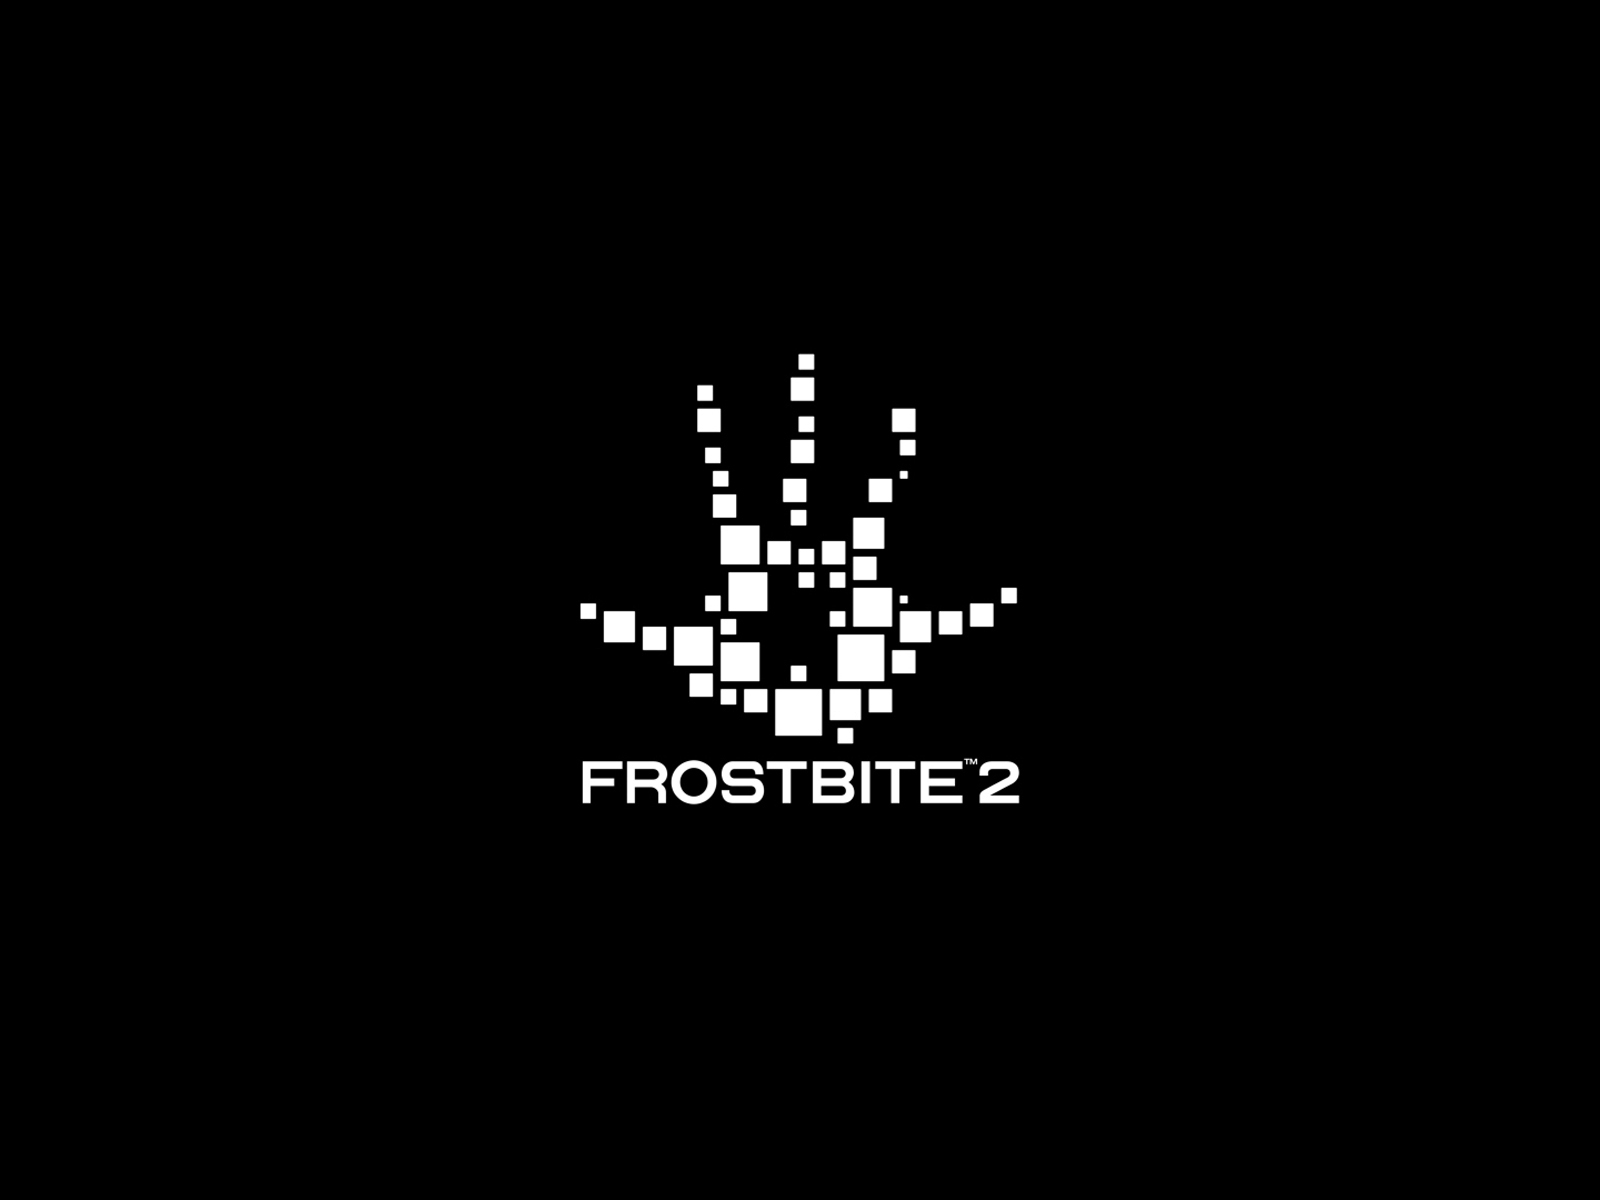 Frostbite 2 for 1600 x 1200 resolution